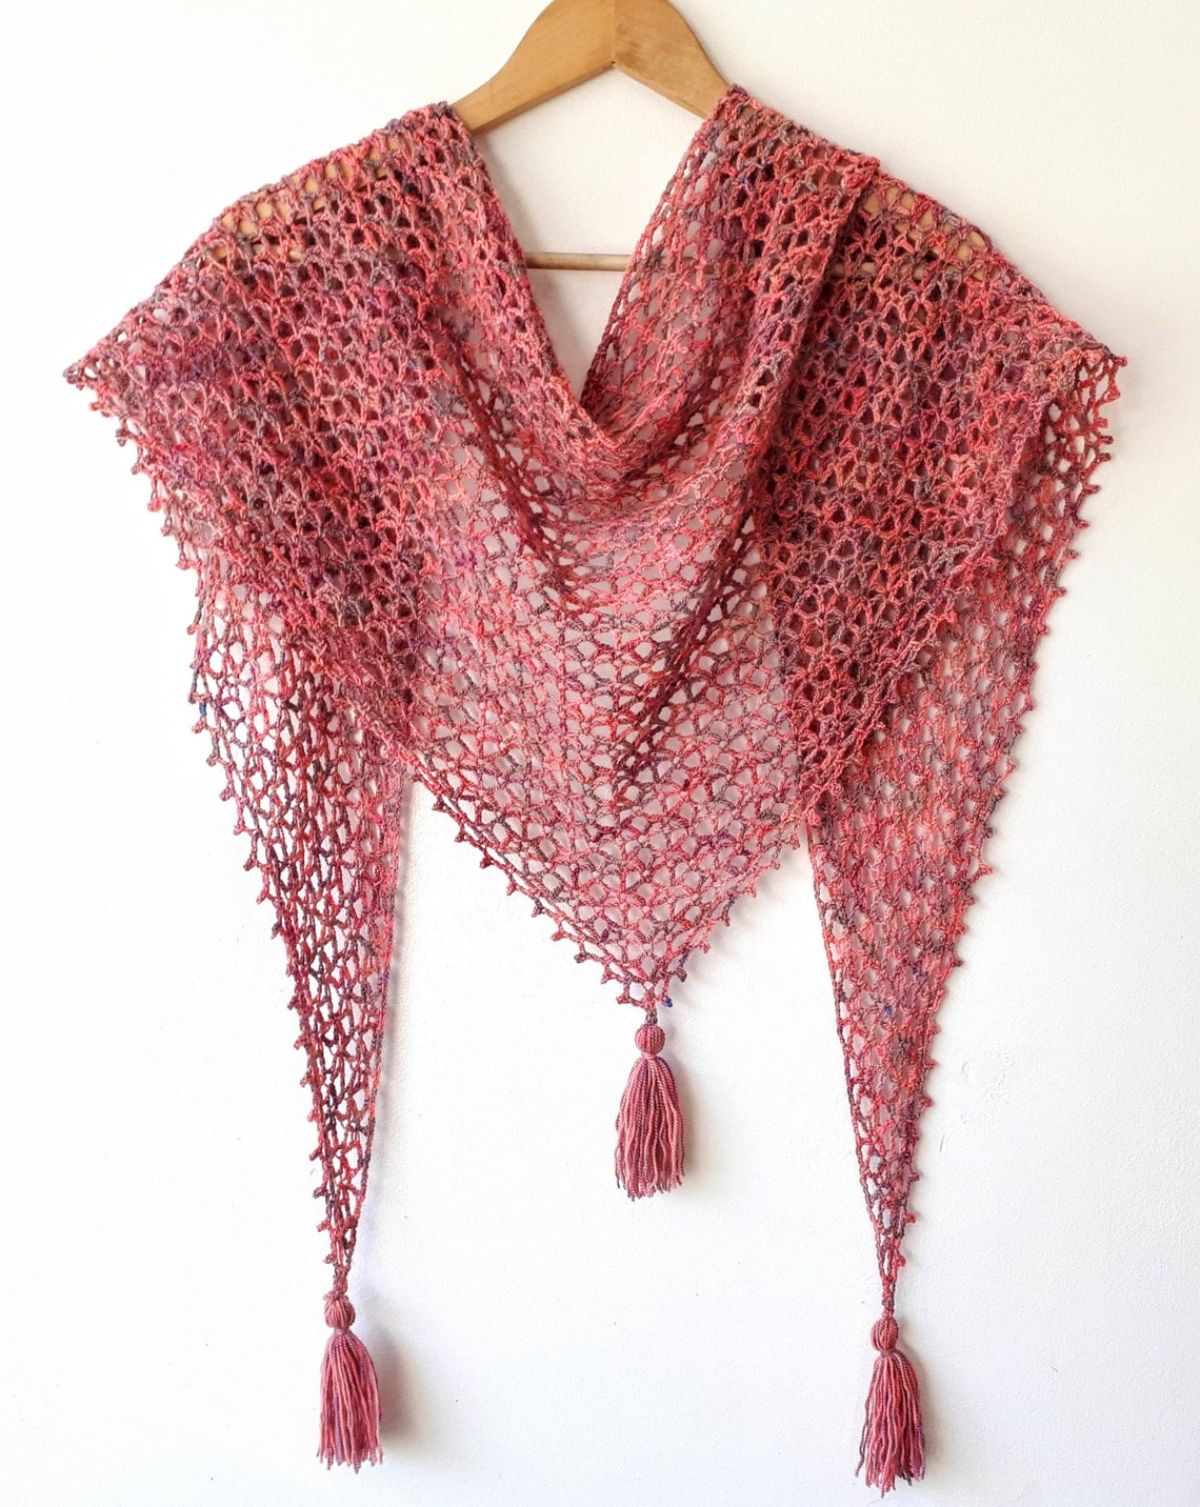 Pink crochet fishnet style lace shawl with a pink tassel hanging from each corner of the shawl draped over a wooden hanger.